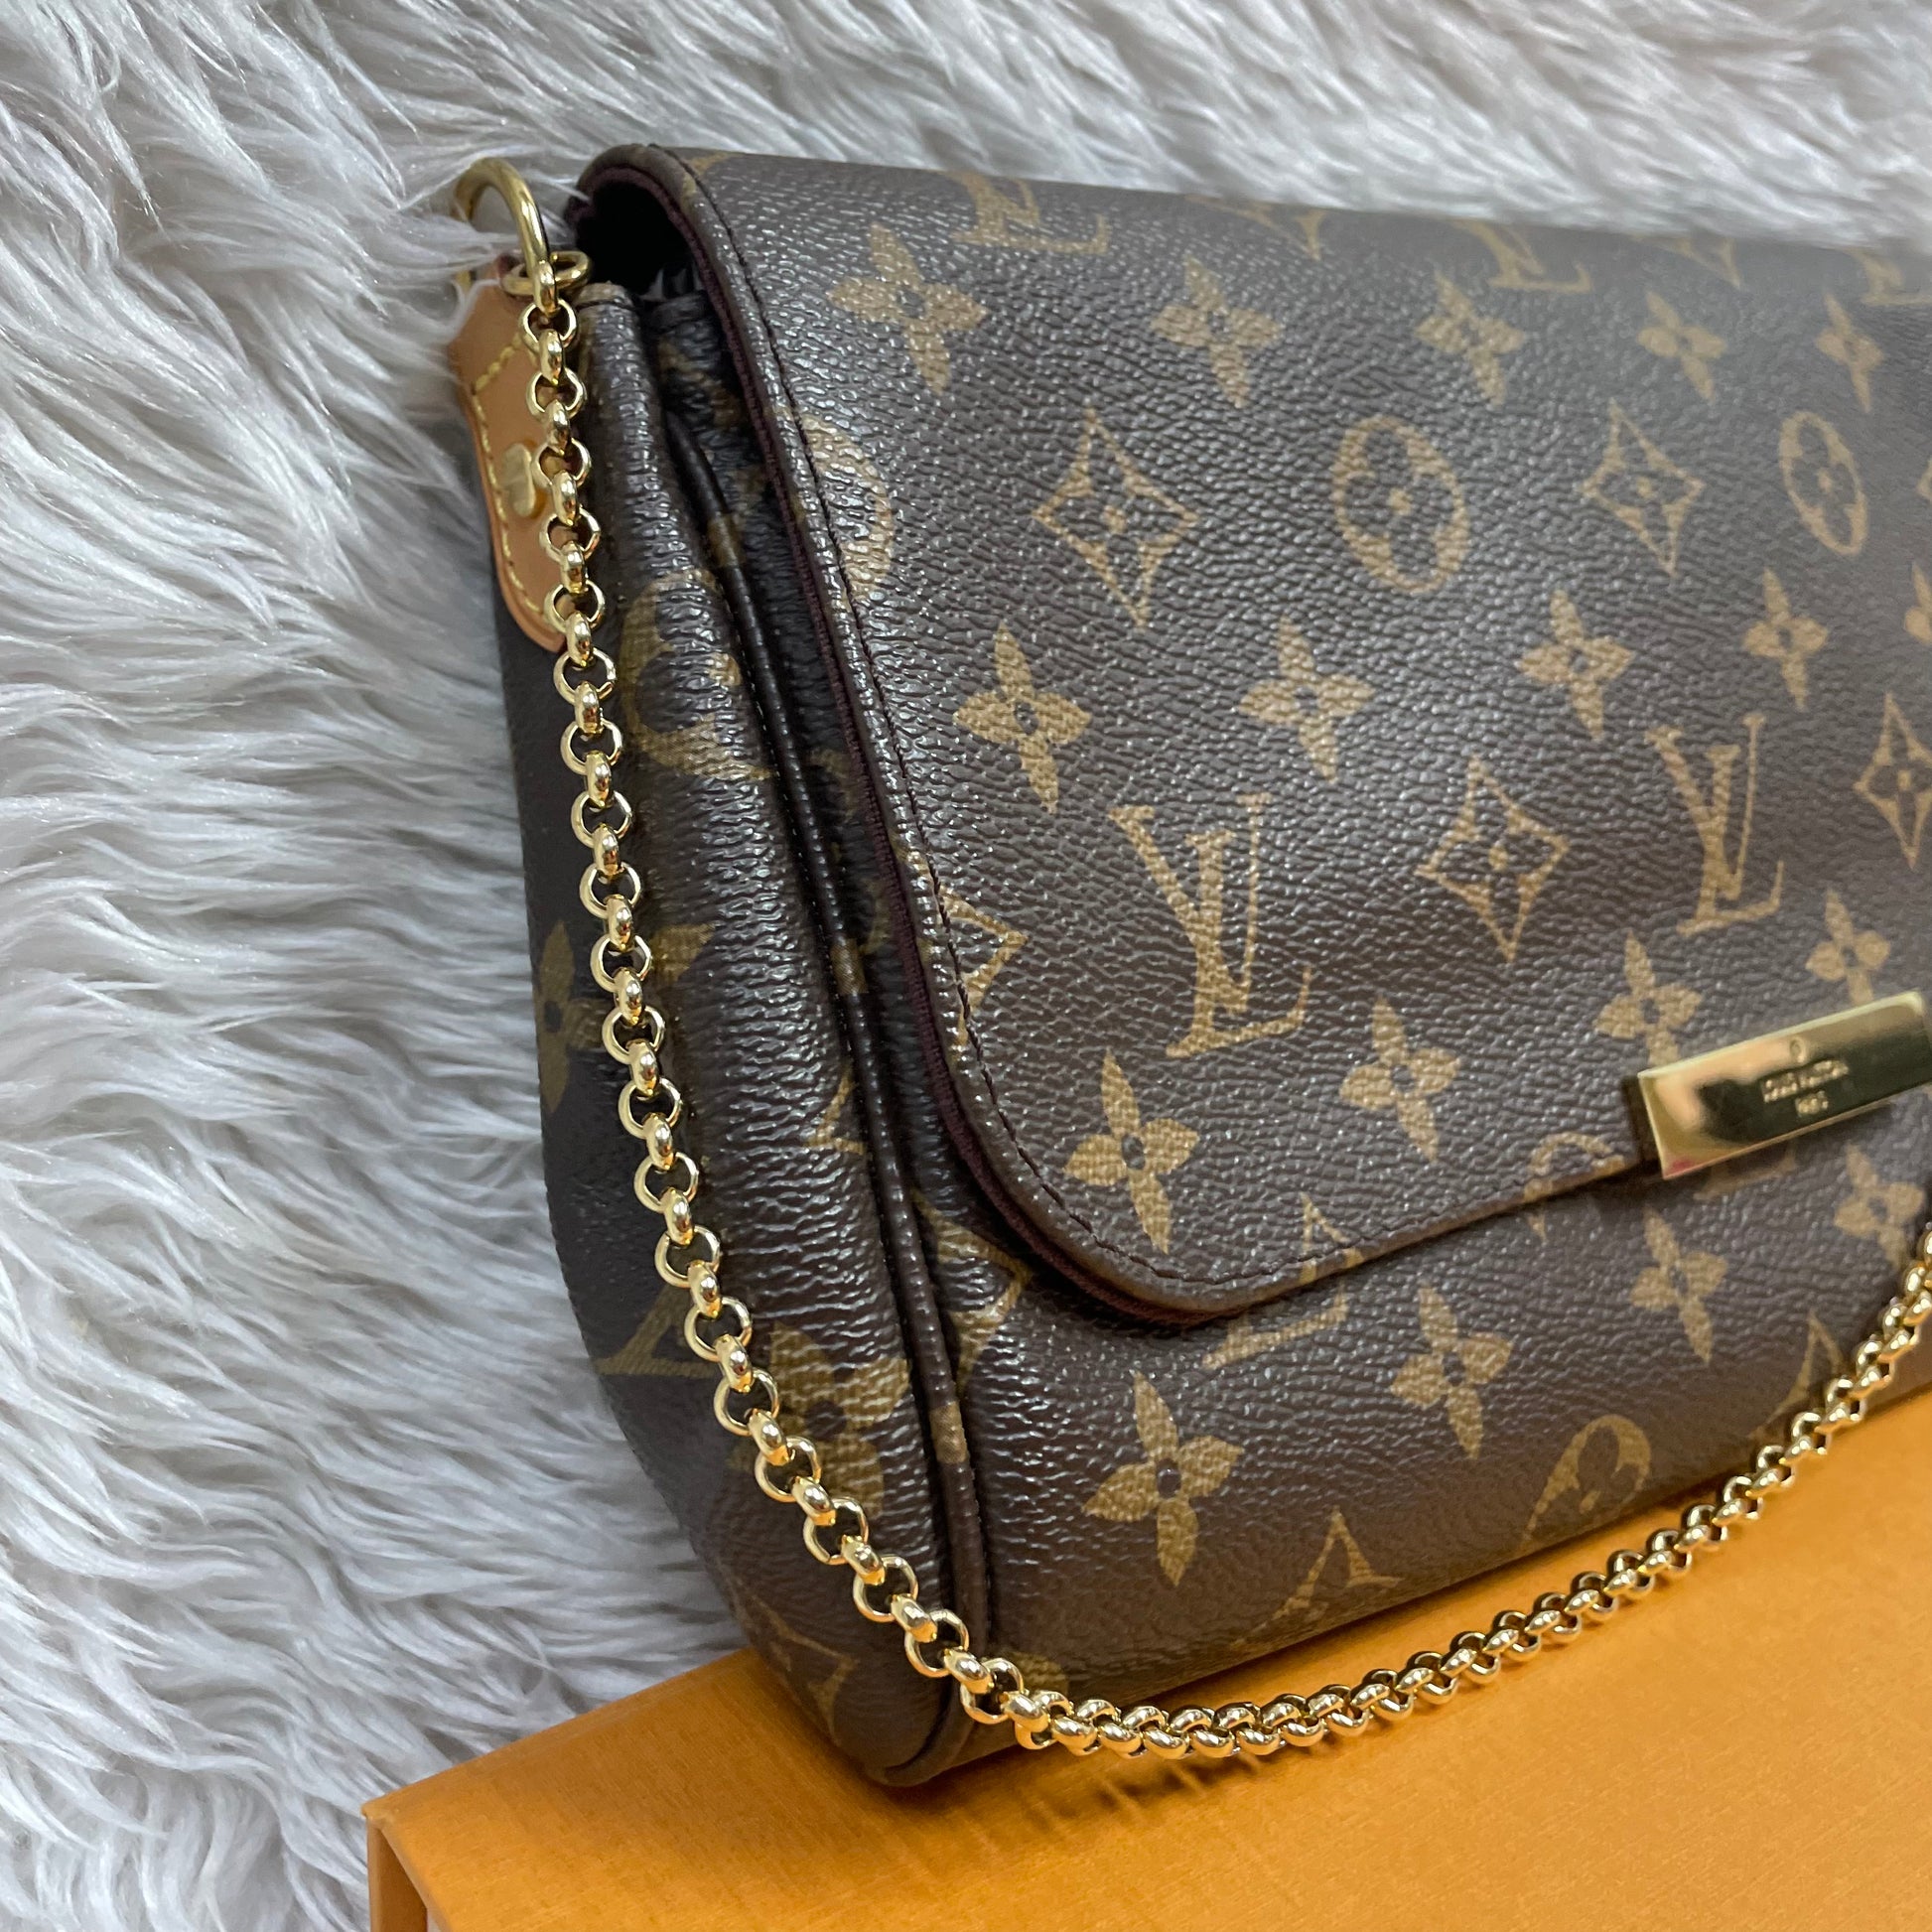 Authentic LV Favourite MM crossbody come with box, dust bag